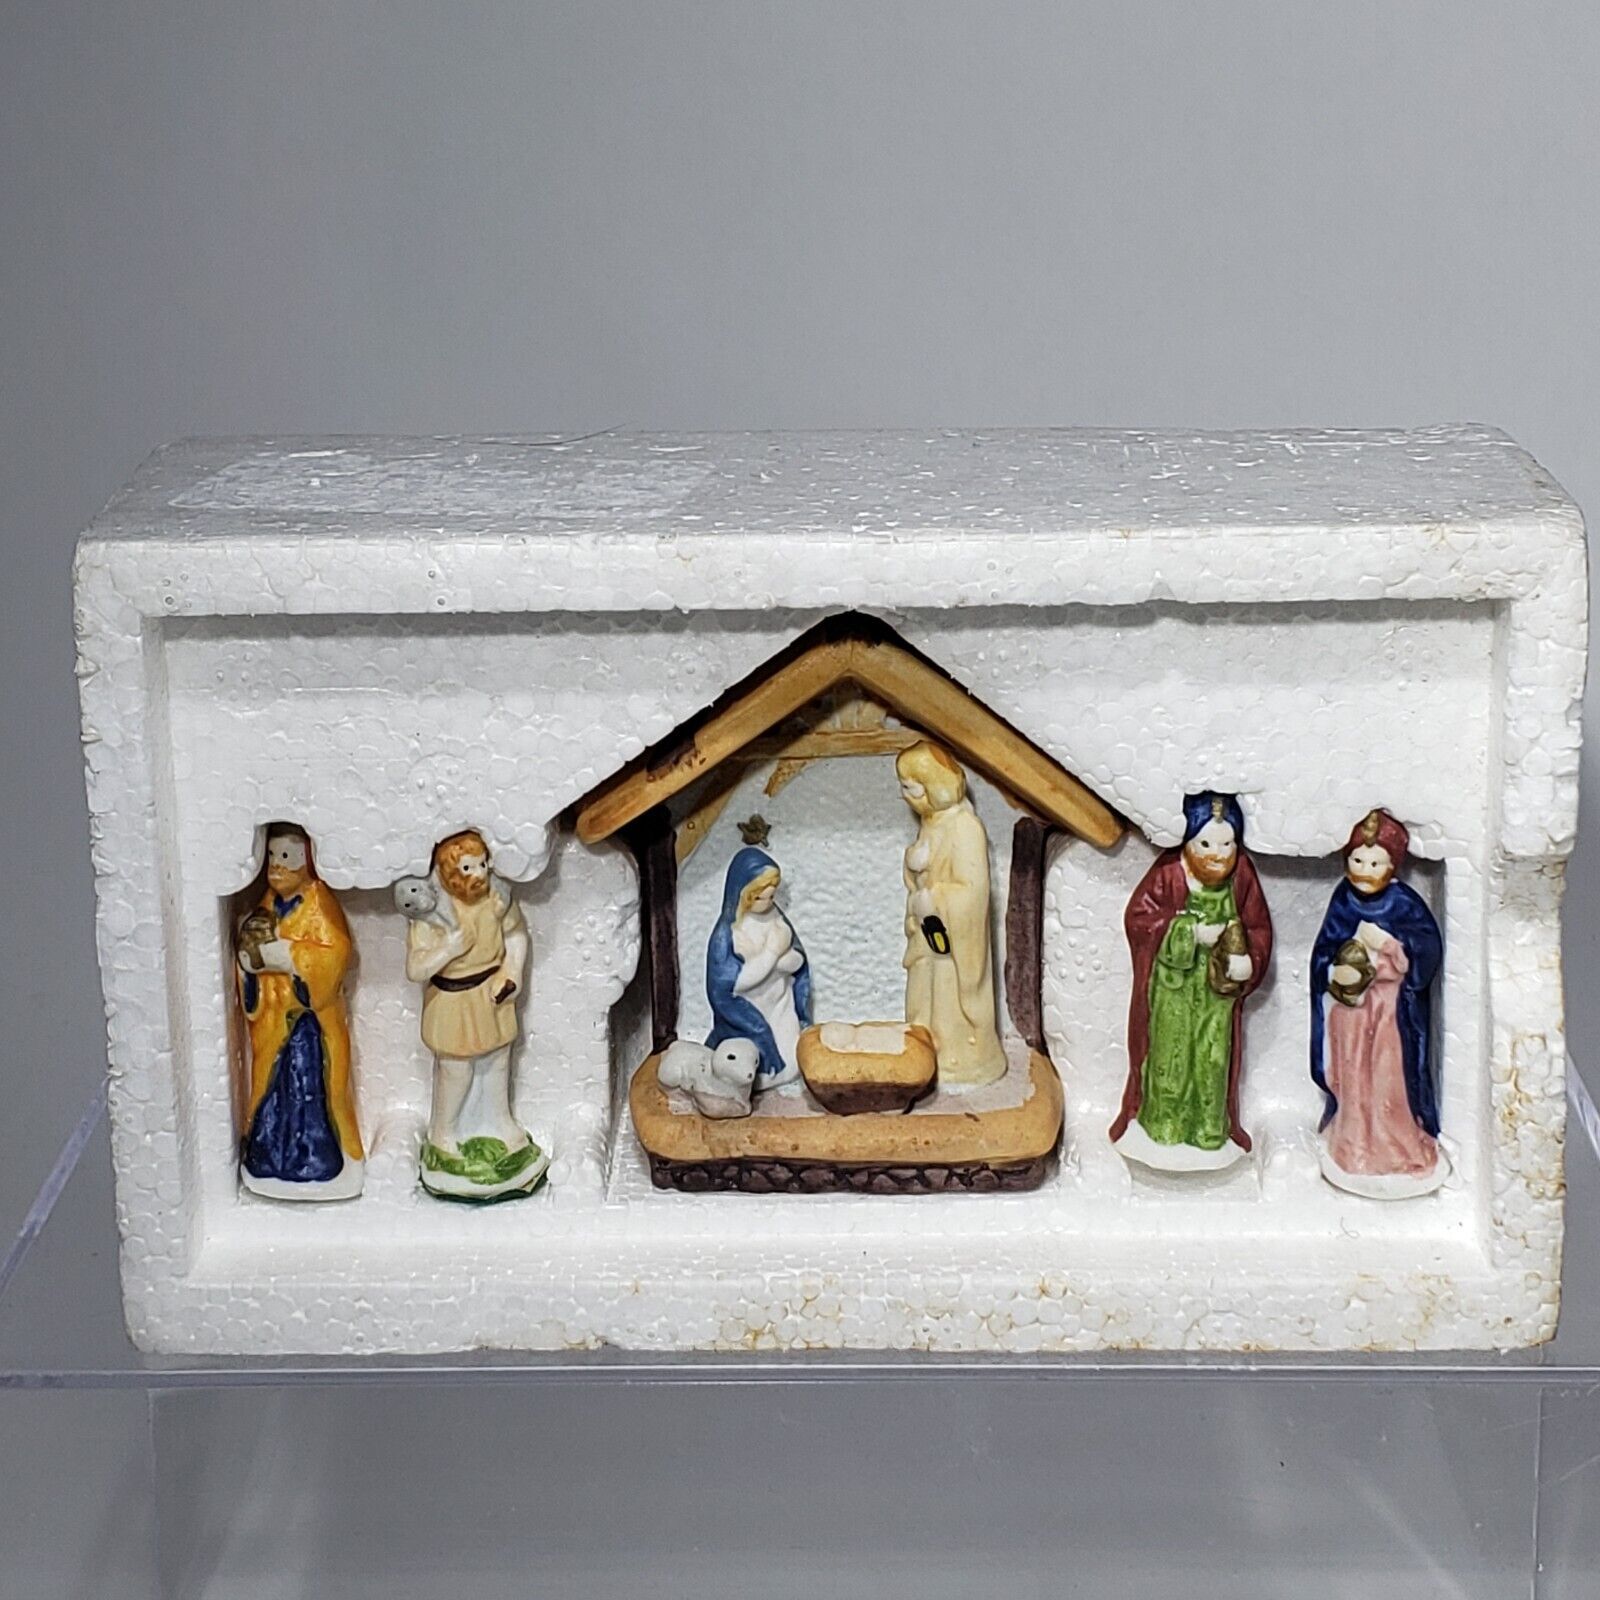 5 Piece Lemax Dickensvale Nativity Scene  1992 Hand Painted Porcelain 23064 - $12.95